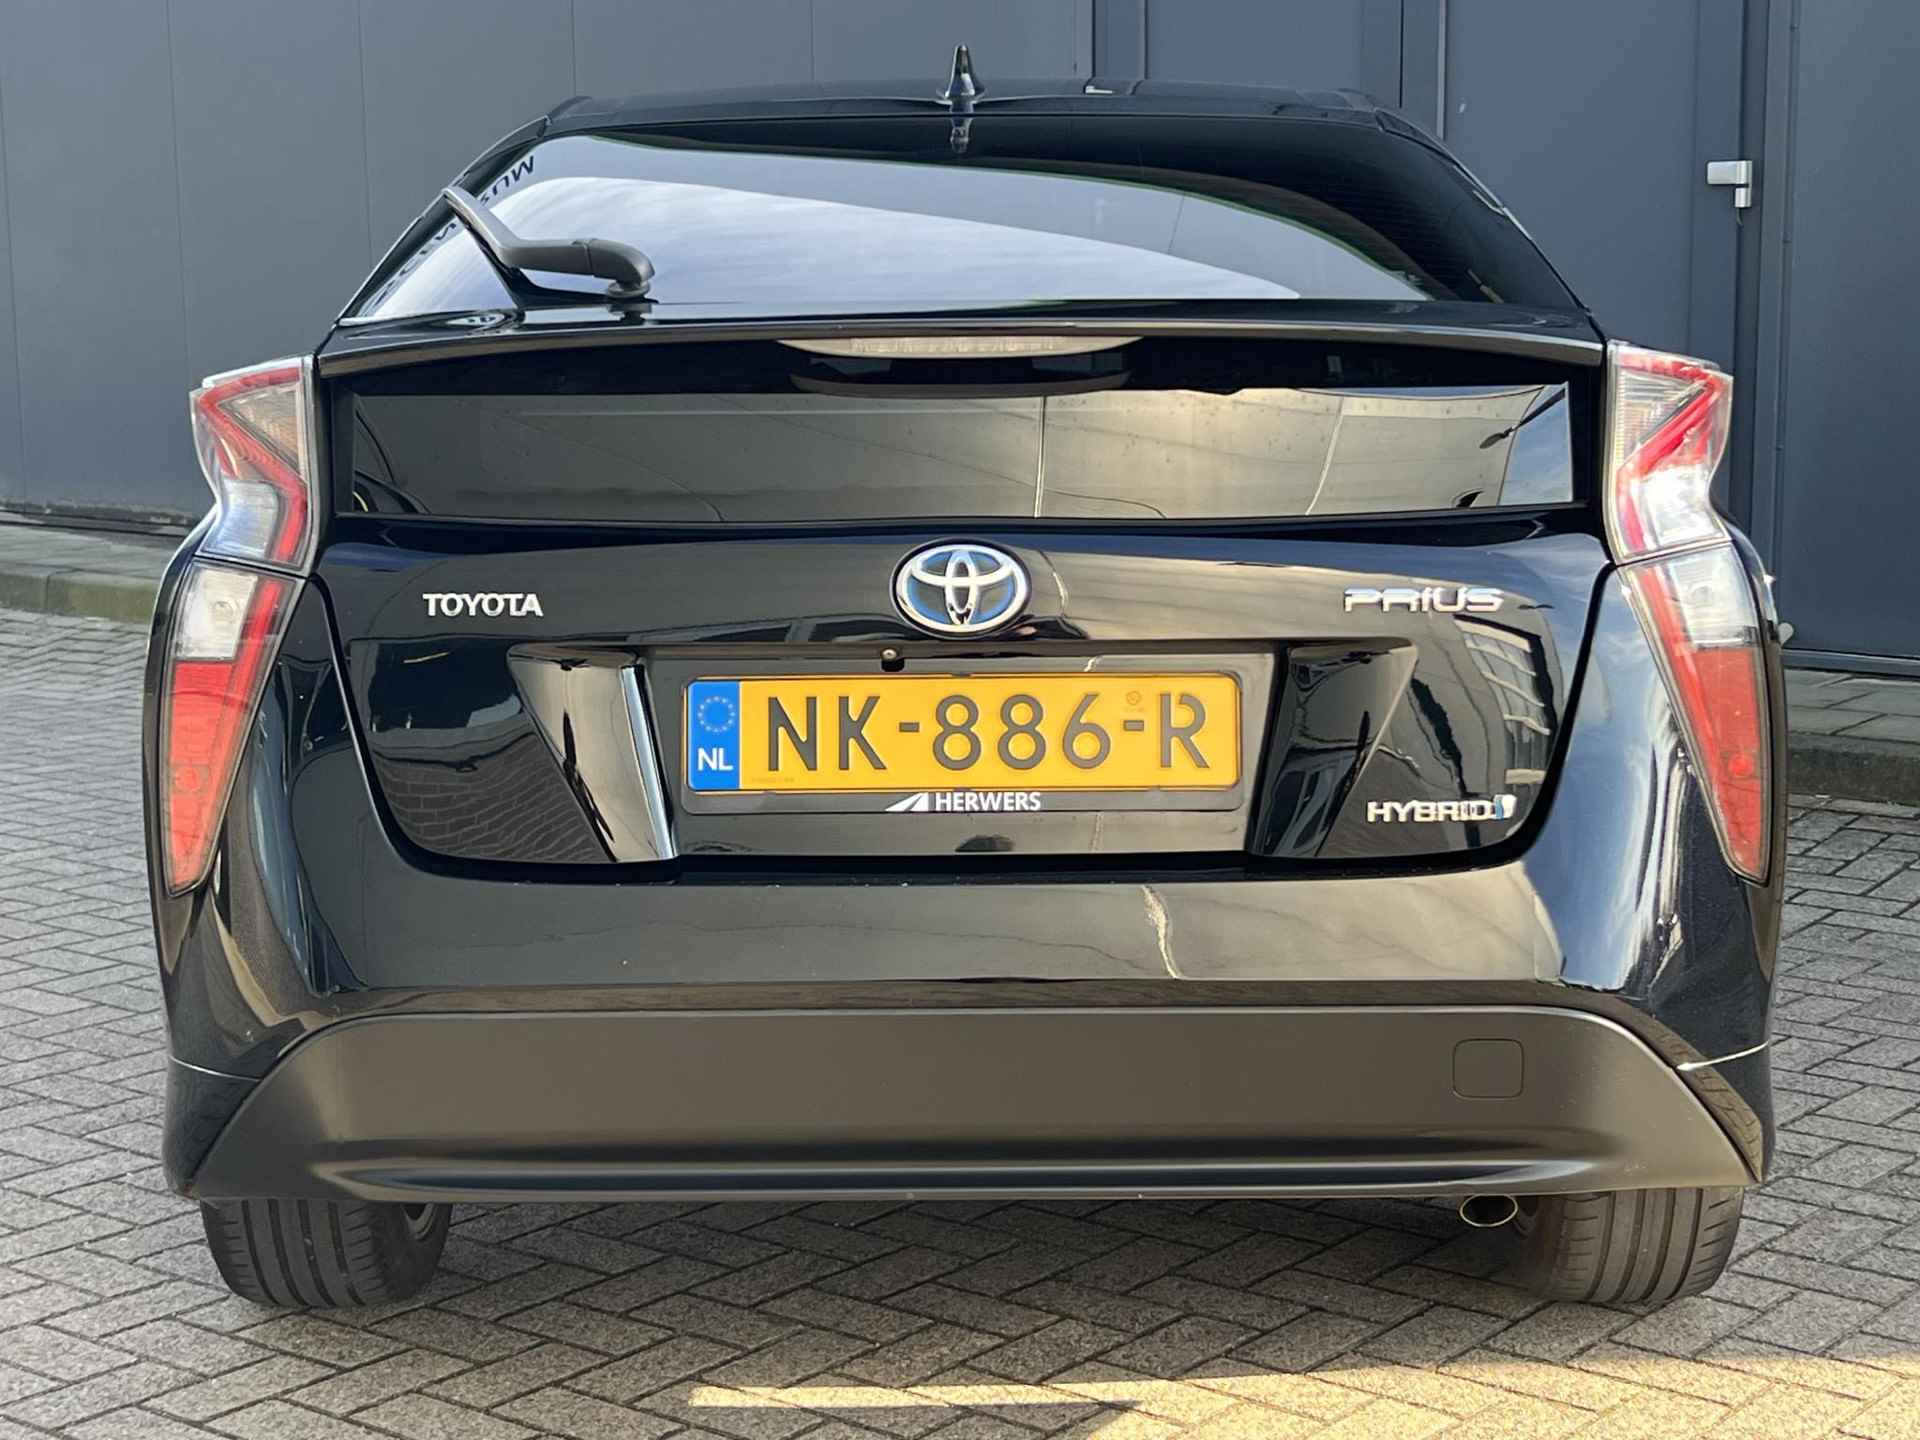 Toyota Prius 1.8 First Edition Automaat / Navigatie / Cruise Control / Climate Control / Stoelverwarming / DAB / Bluetooth / Head-Up Display / Dodehoek Herkenning / Camera - 23/30